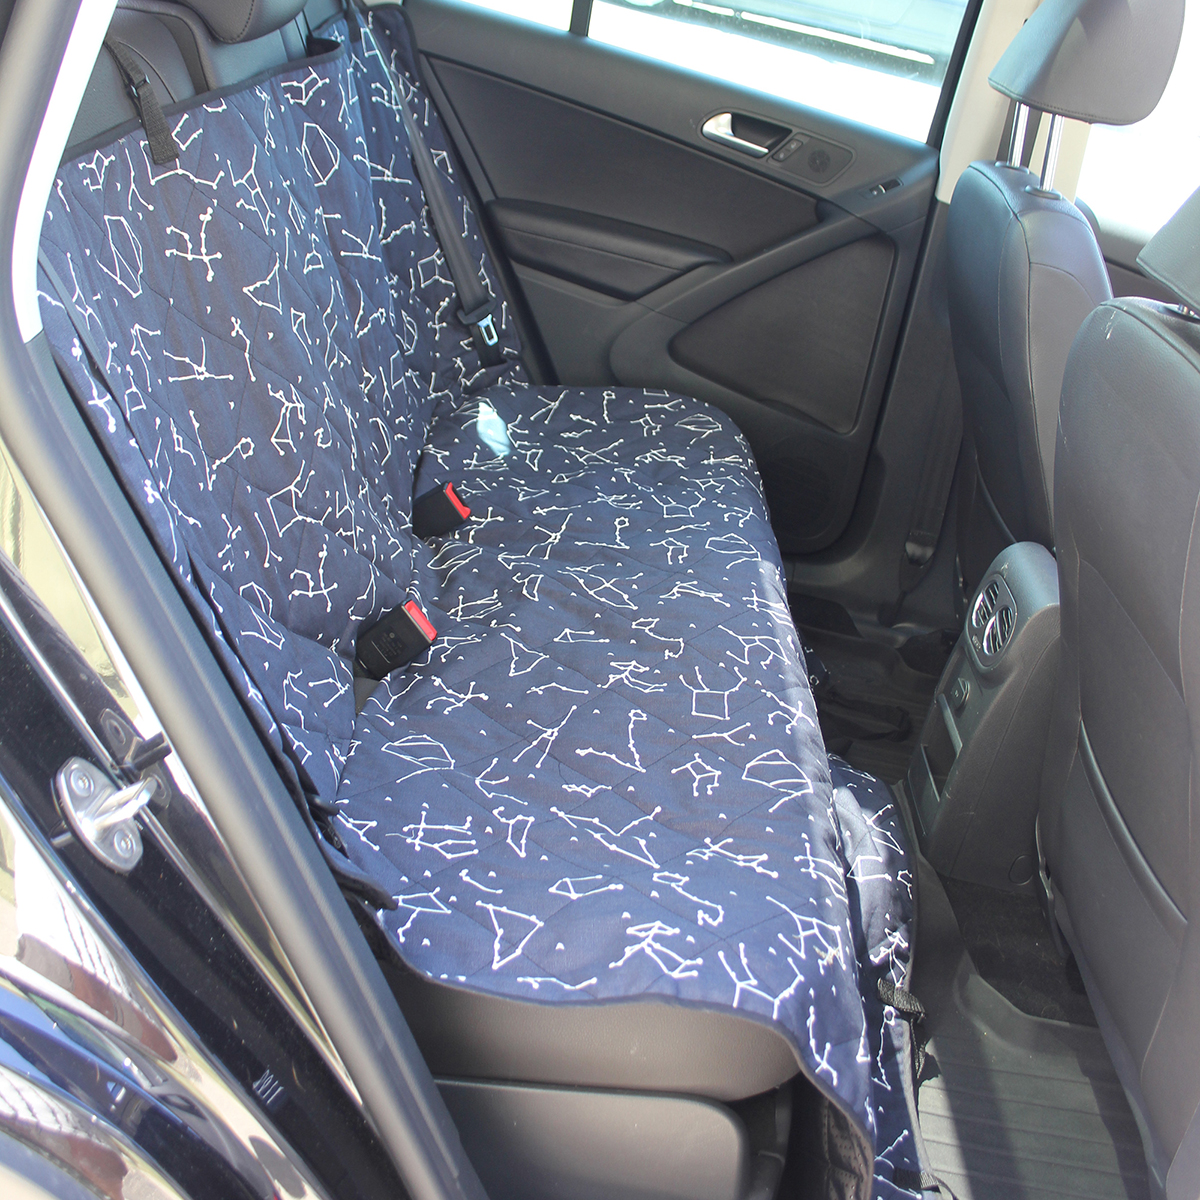 https://www.containerstore.com/catalogimages/499897/10095989-csc61-car%20seat-ven.jpg